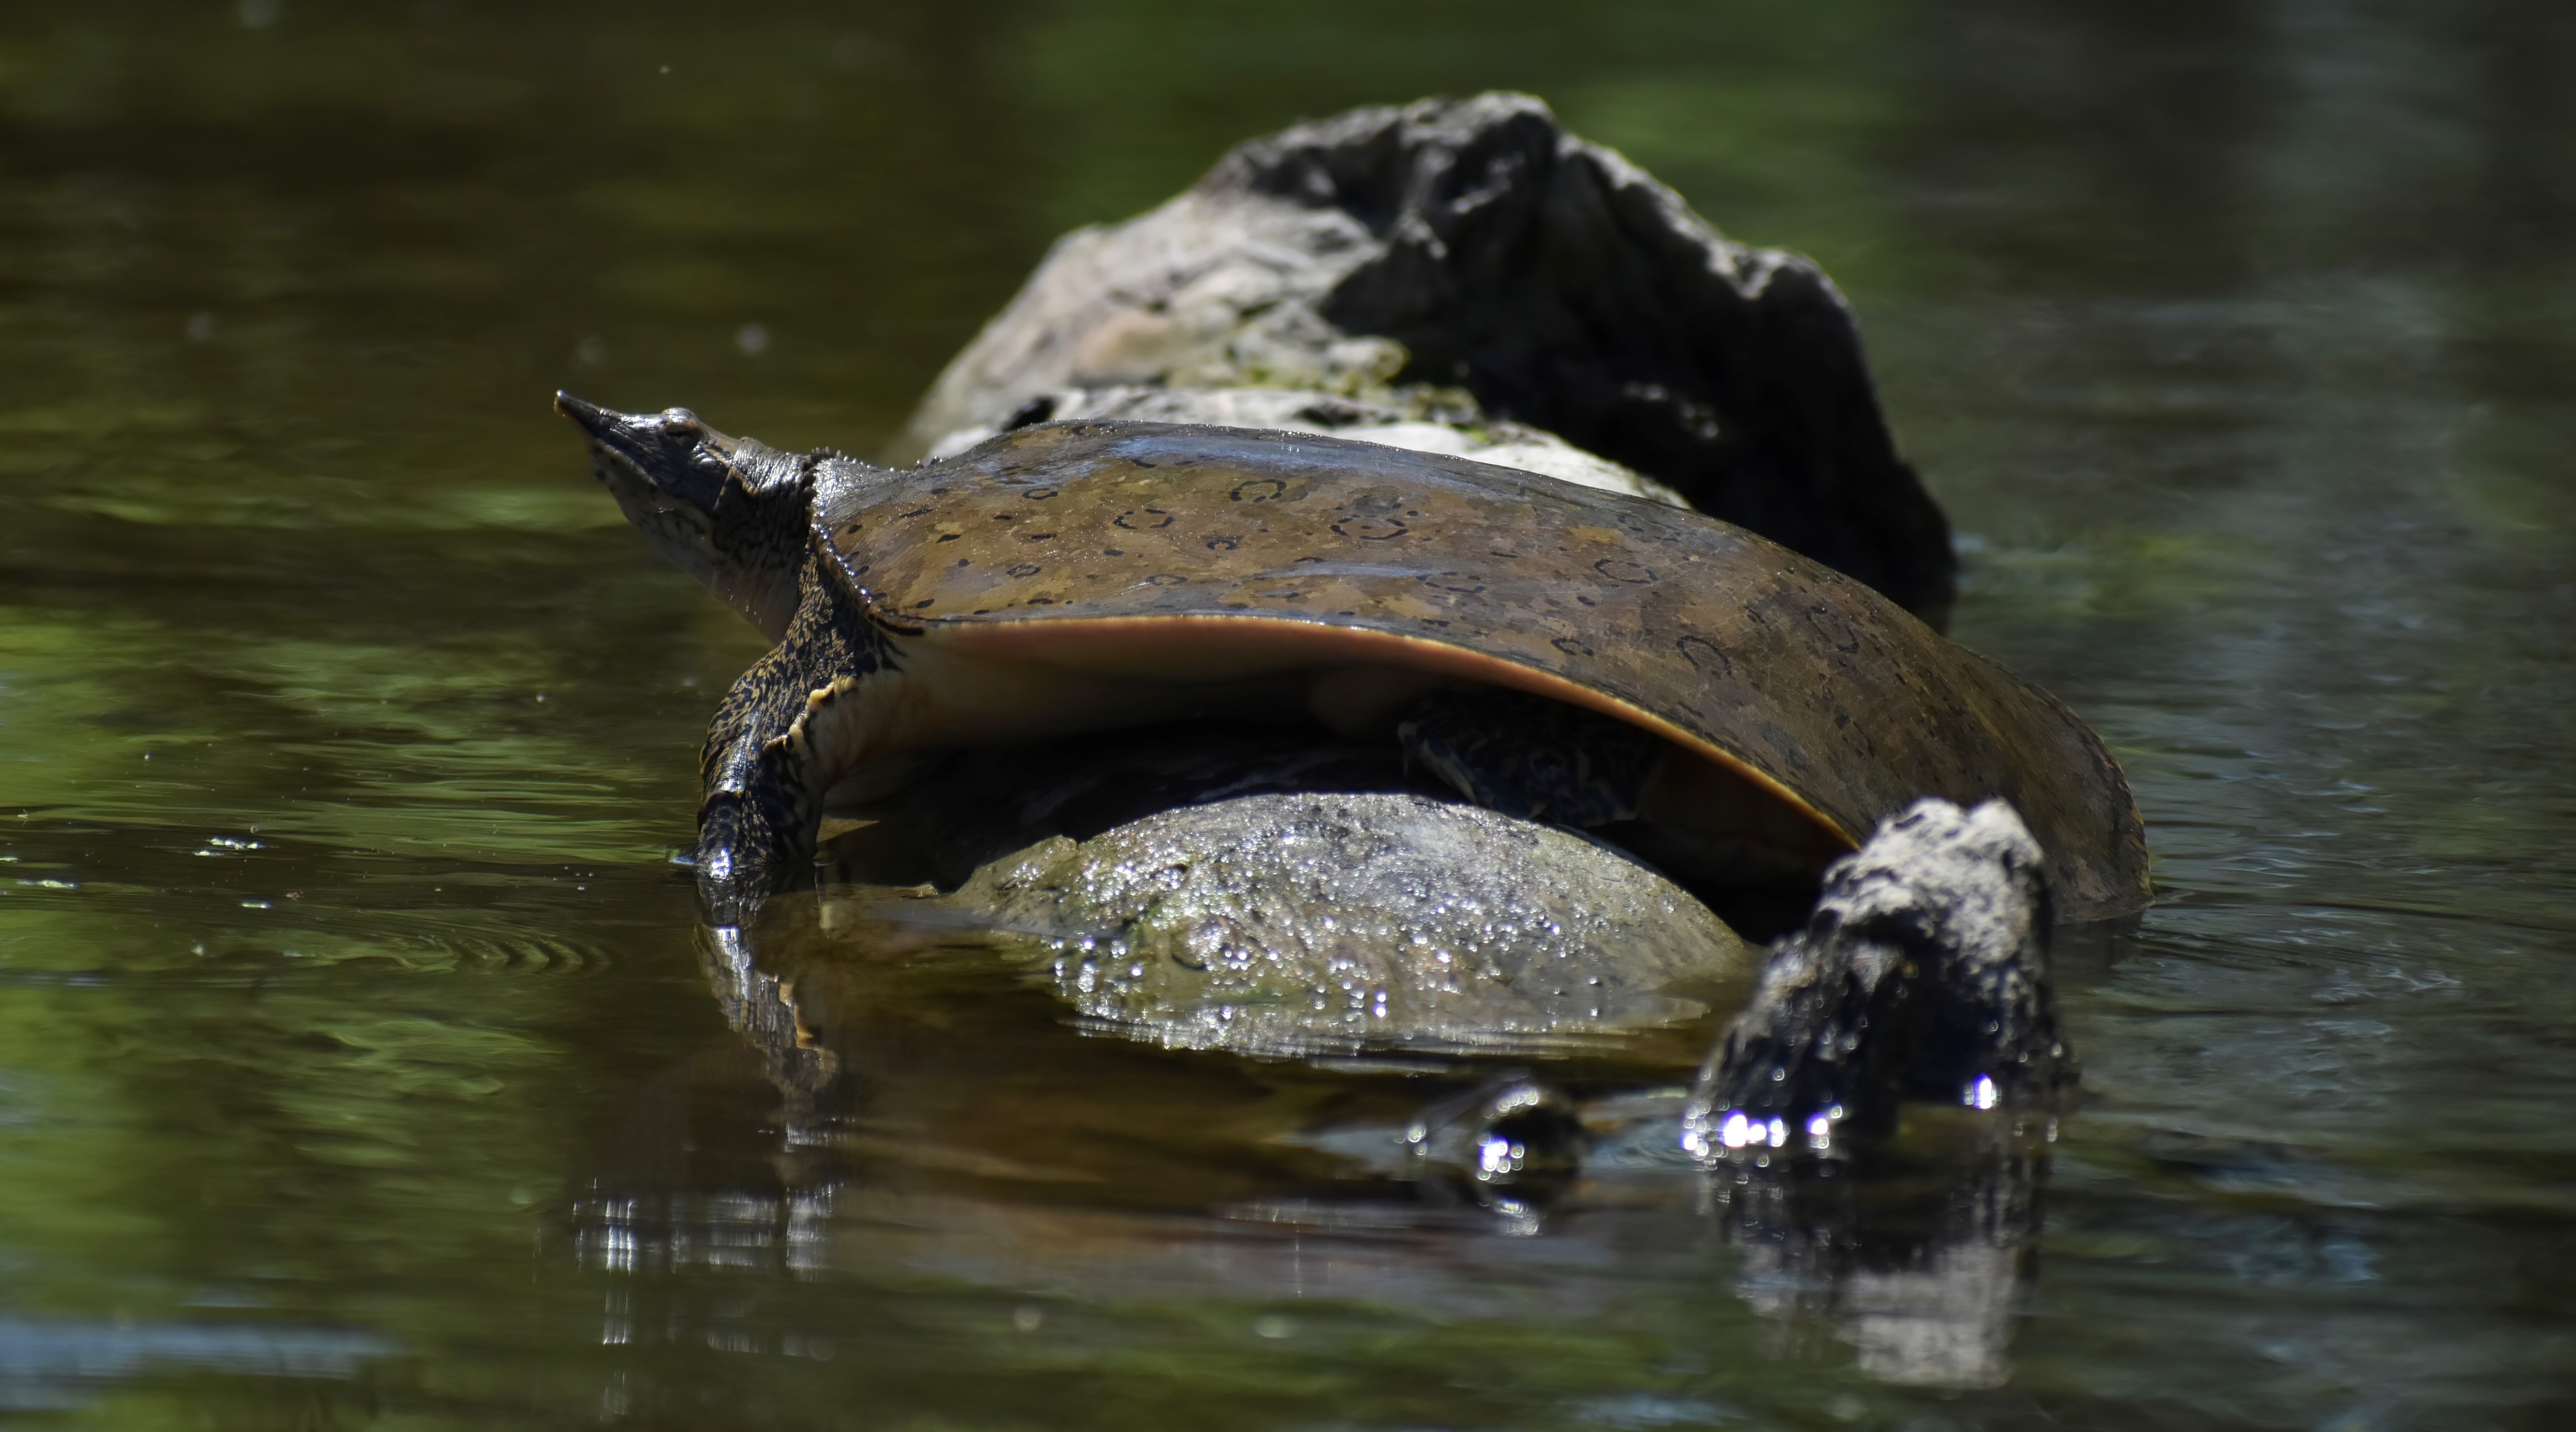 A spiny softshell turtle on a rock.